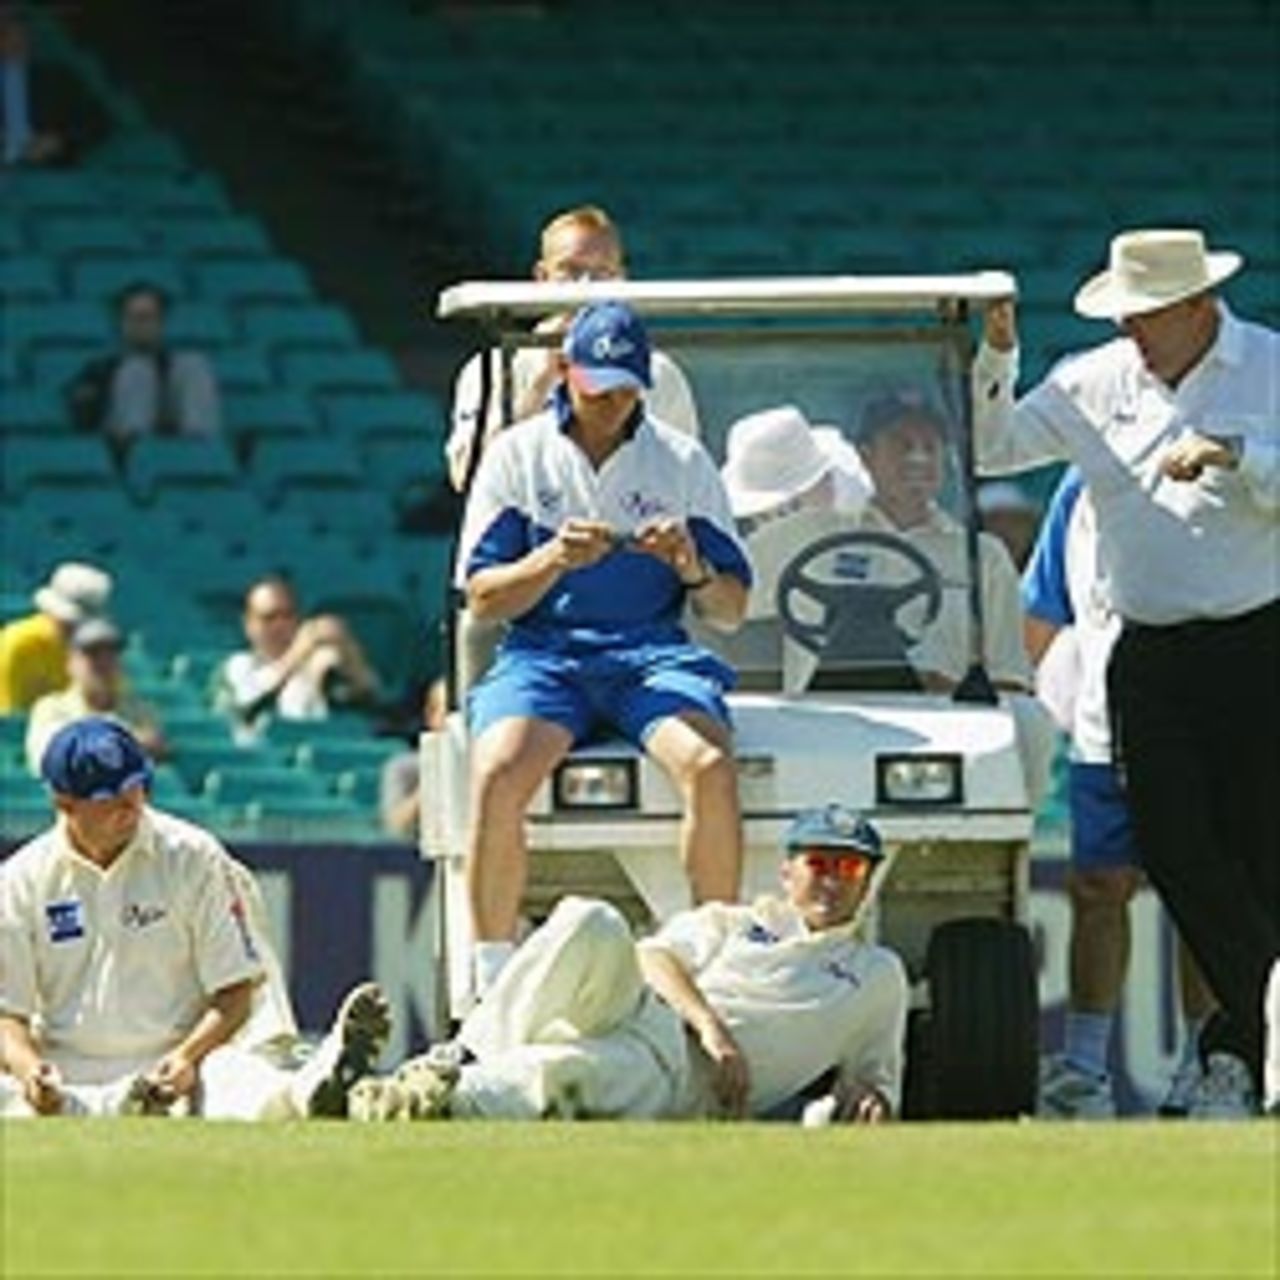 Steve Waugh and the Blues take a break to watch the Melbourne Cup during the Pura Cup Cricket match between the New South Wales Blues and the Western Australia Warriors at the SCG November 4, 2003 in Sydney, Australia.